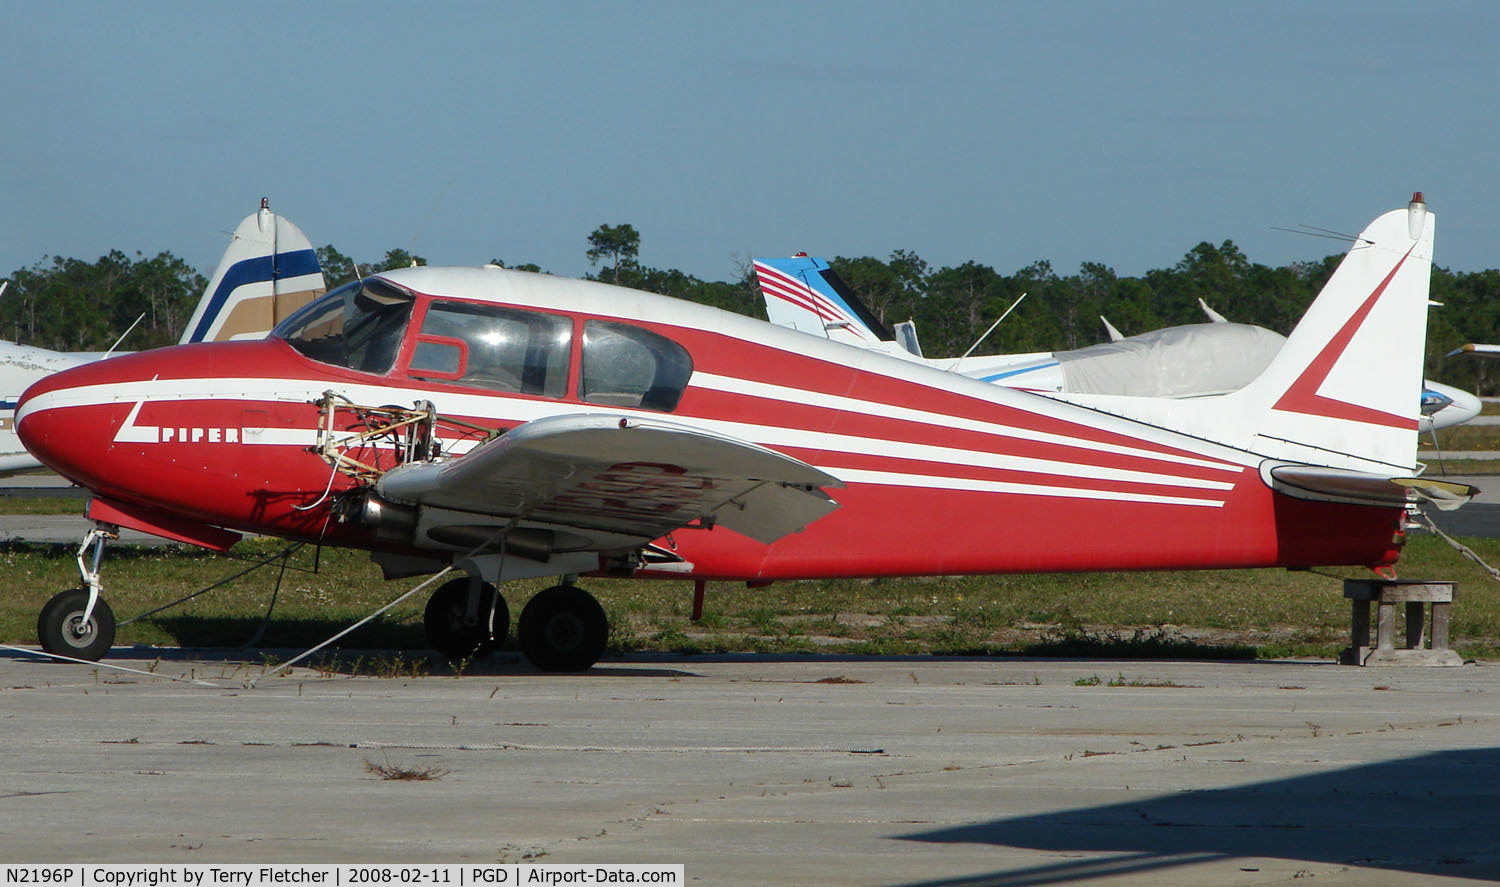 N2196P, 1956 Piper PA-23 C/N 23-805, Another angle on the Pa-23 at Charlotte County